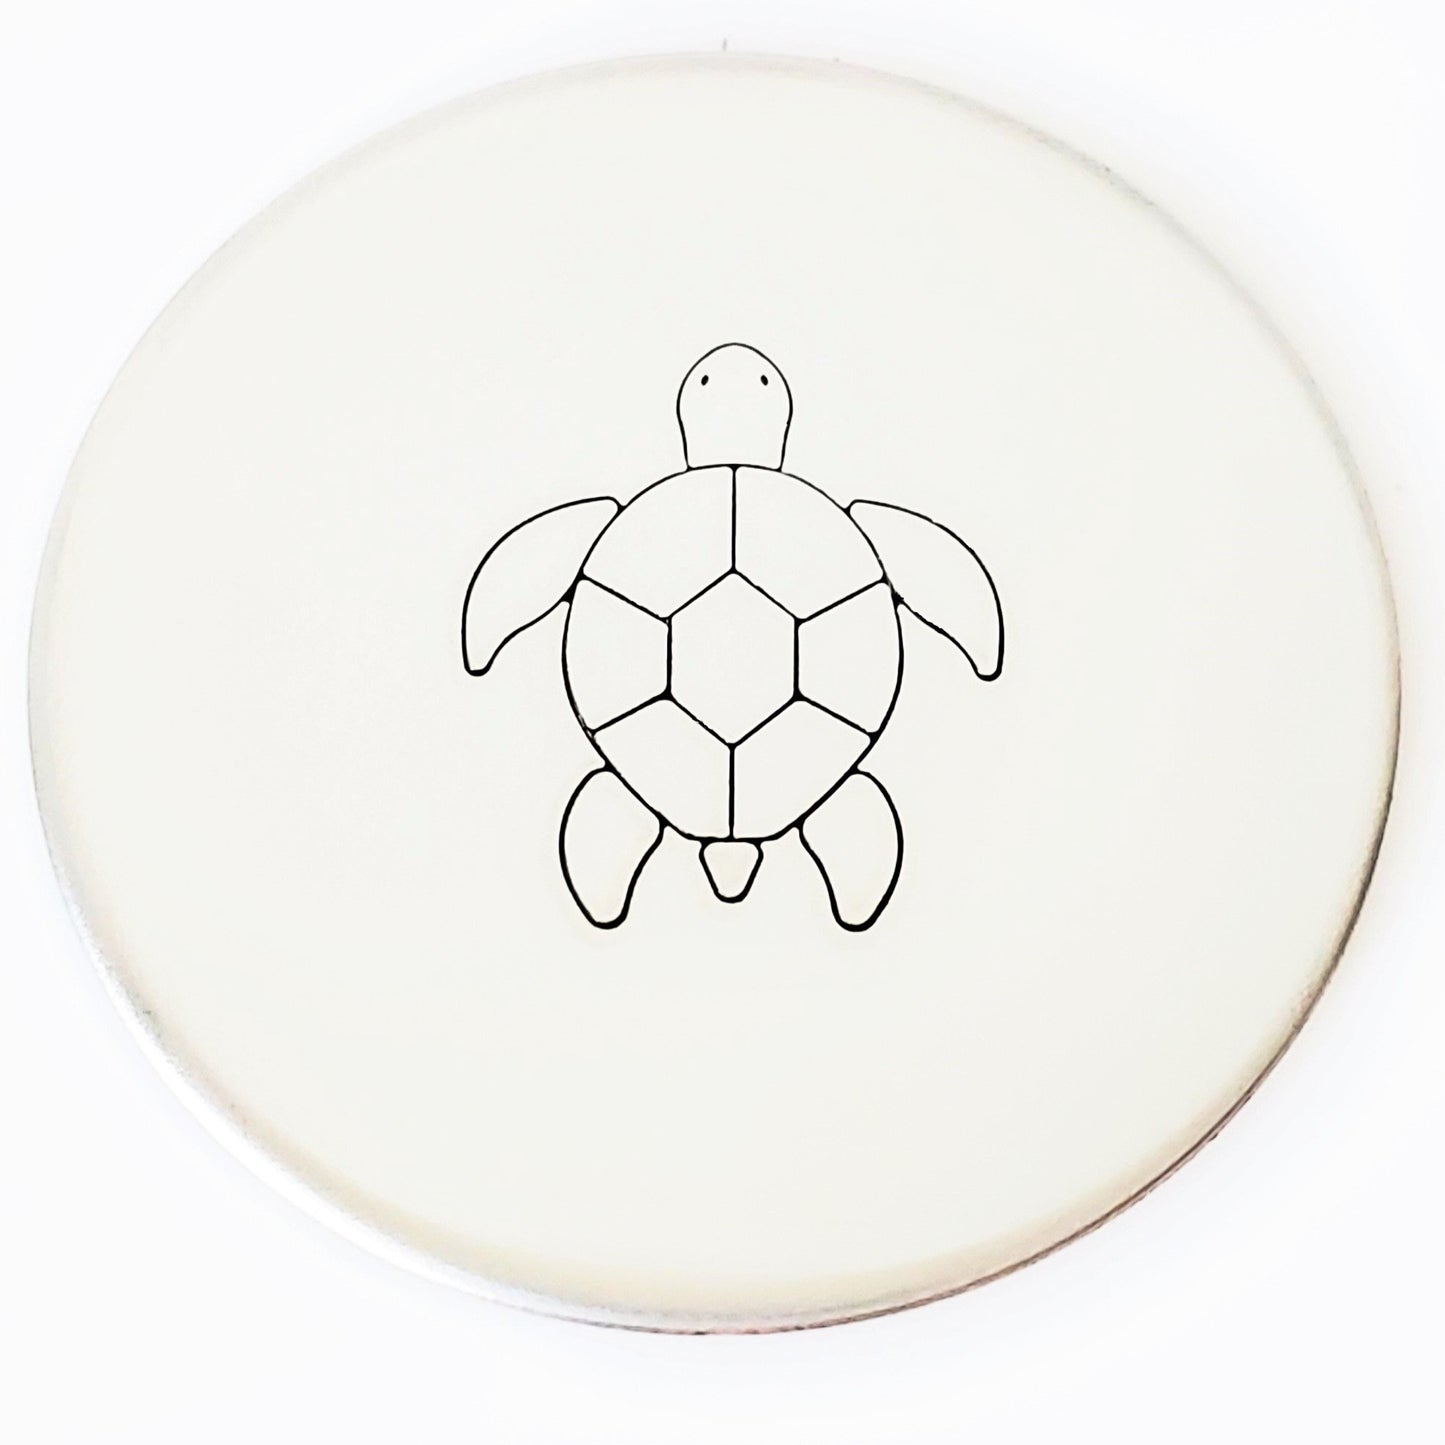 Turtle - Outline